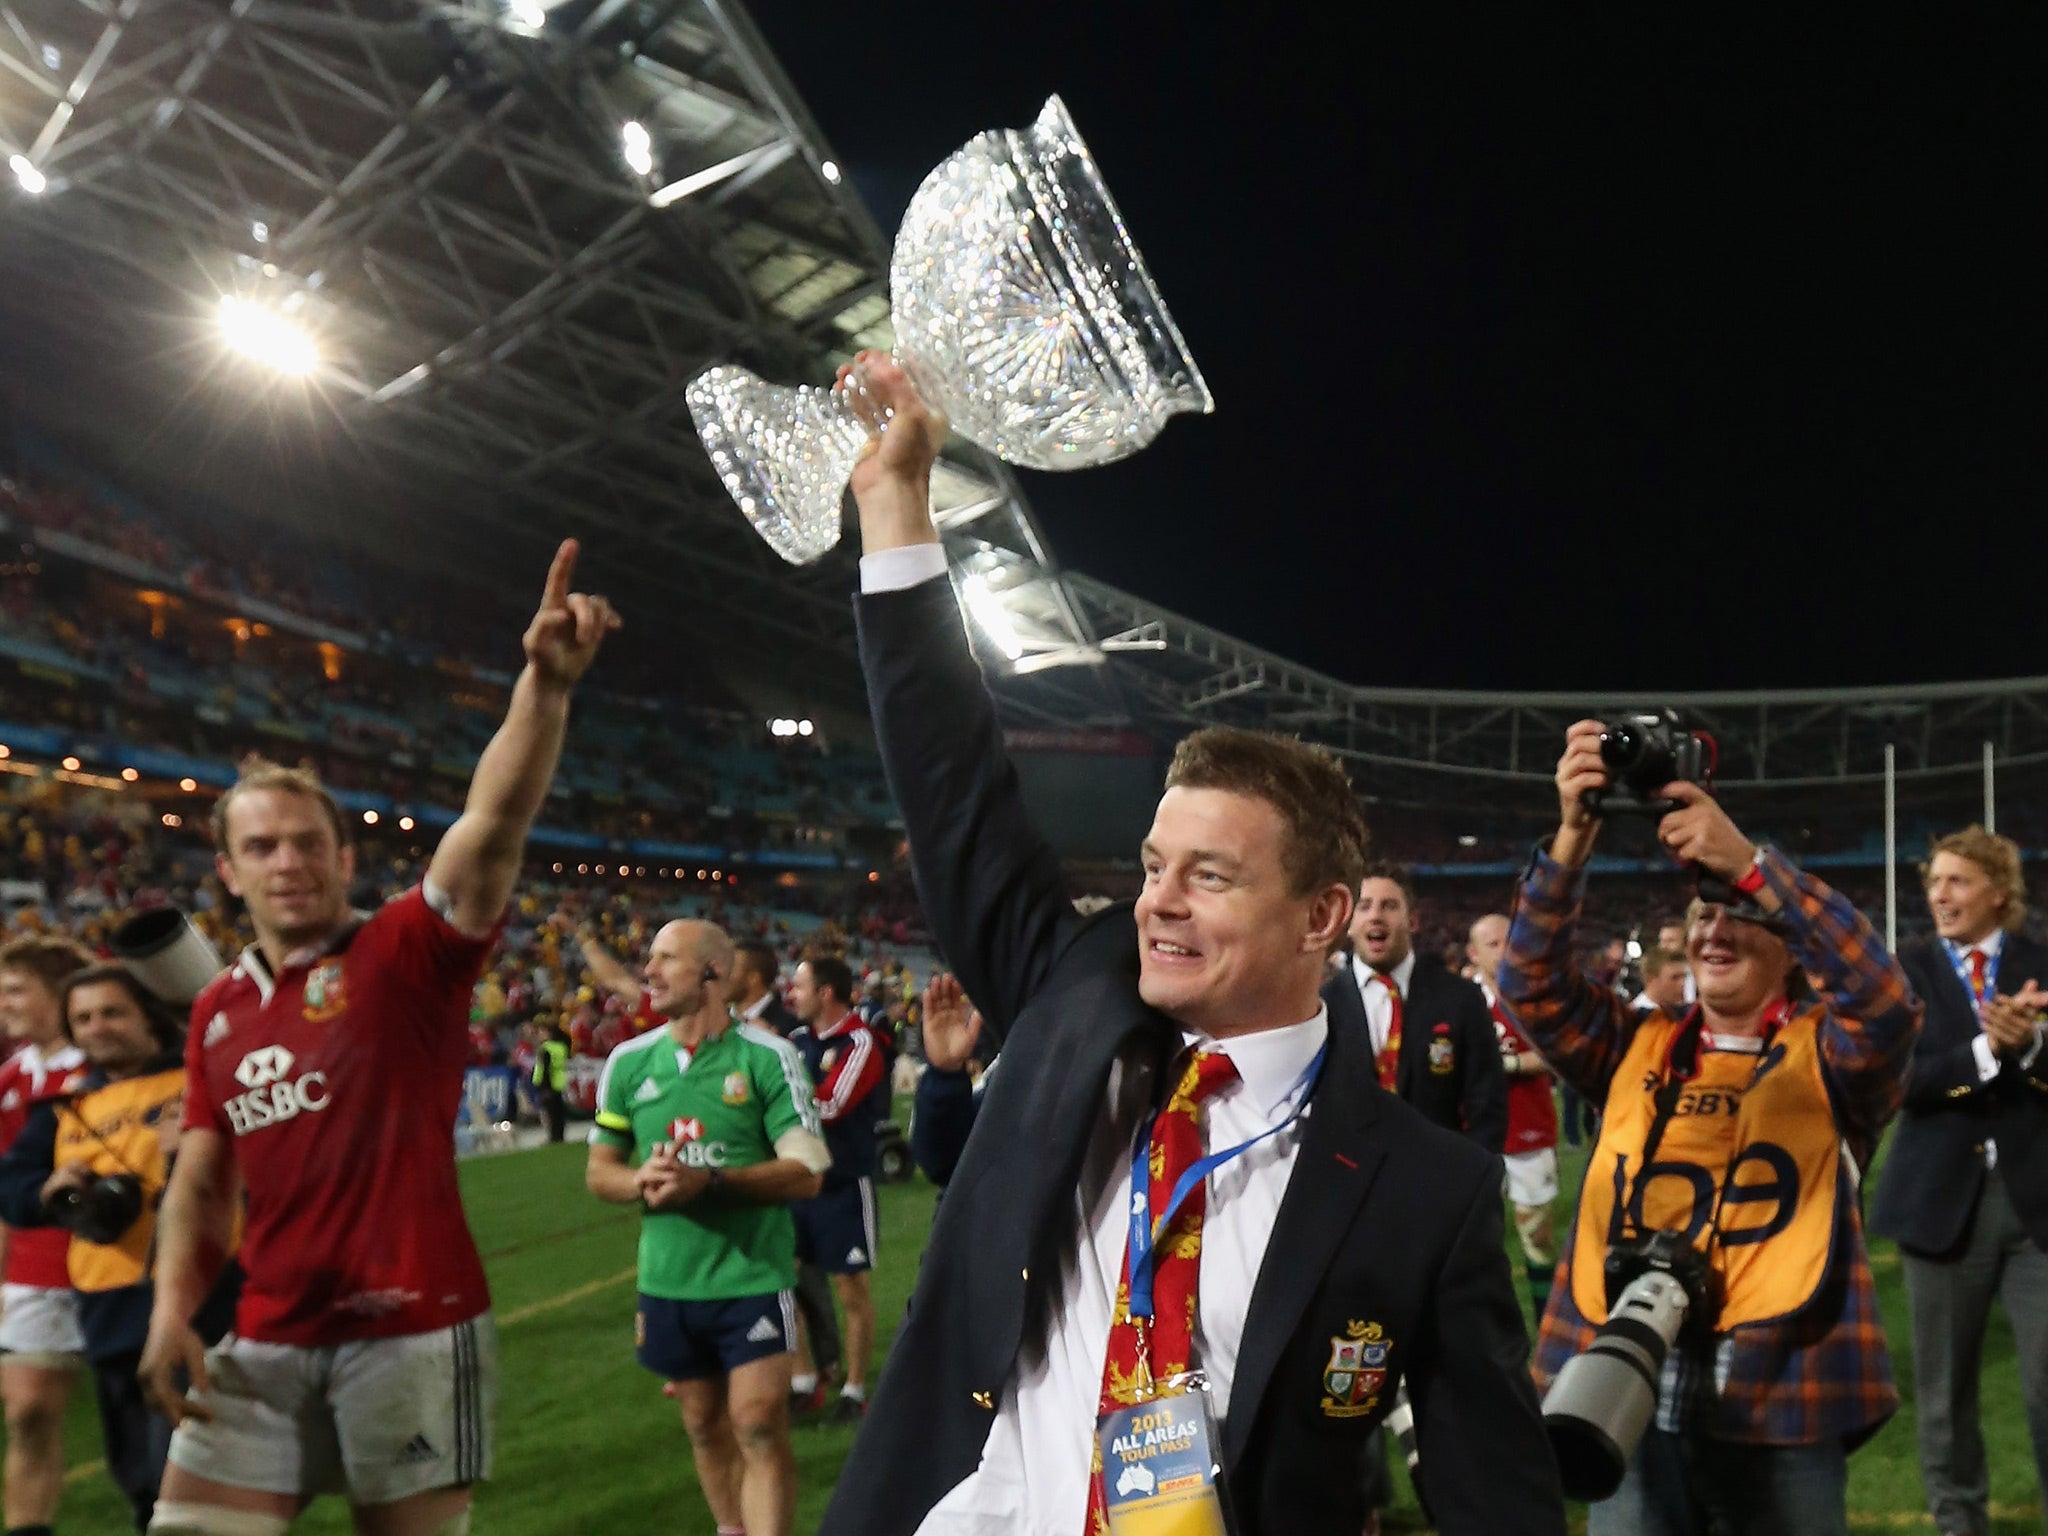 Brian O'Driscoll lifted the Tom Richards Cup with the British and Irish Lions in 2013